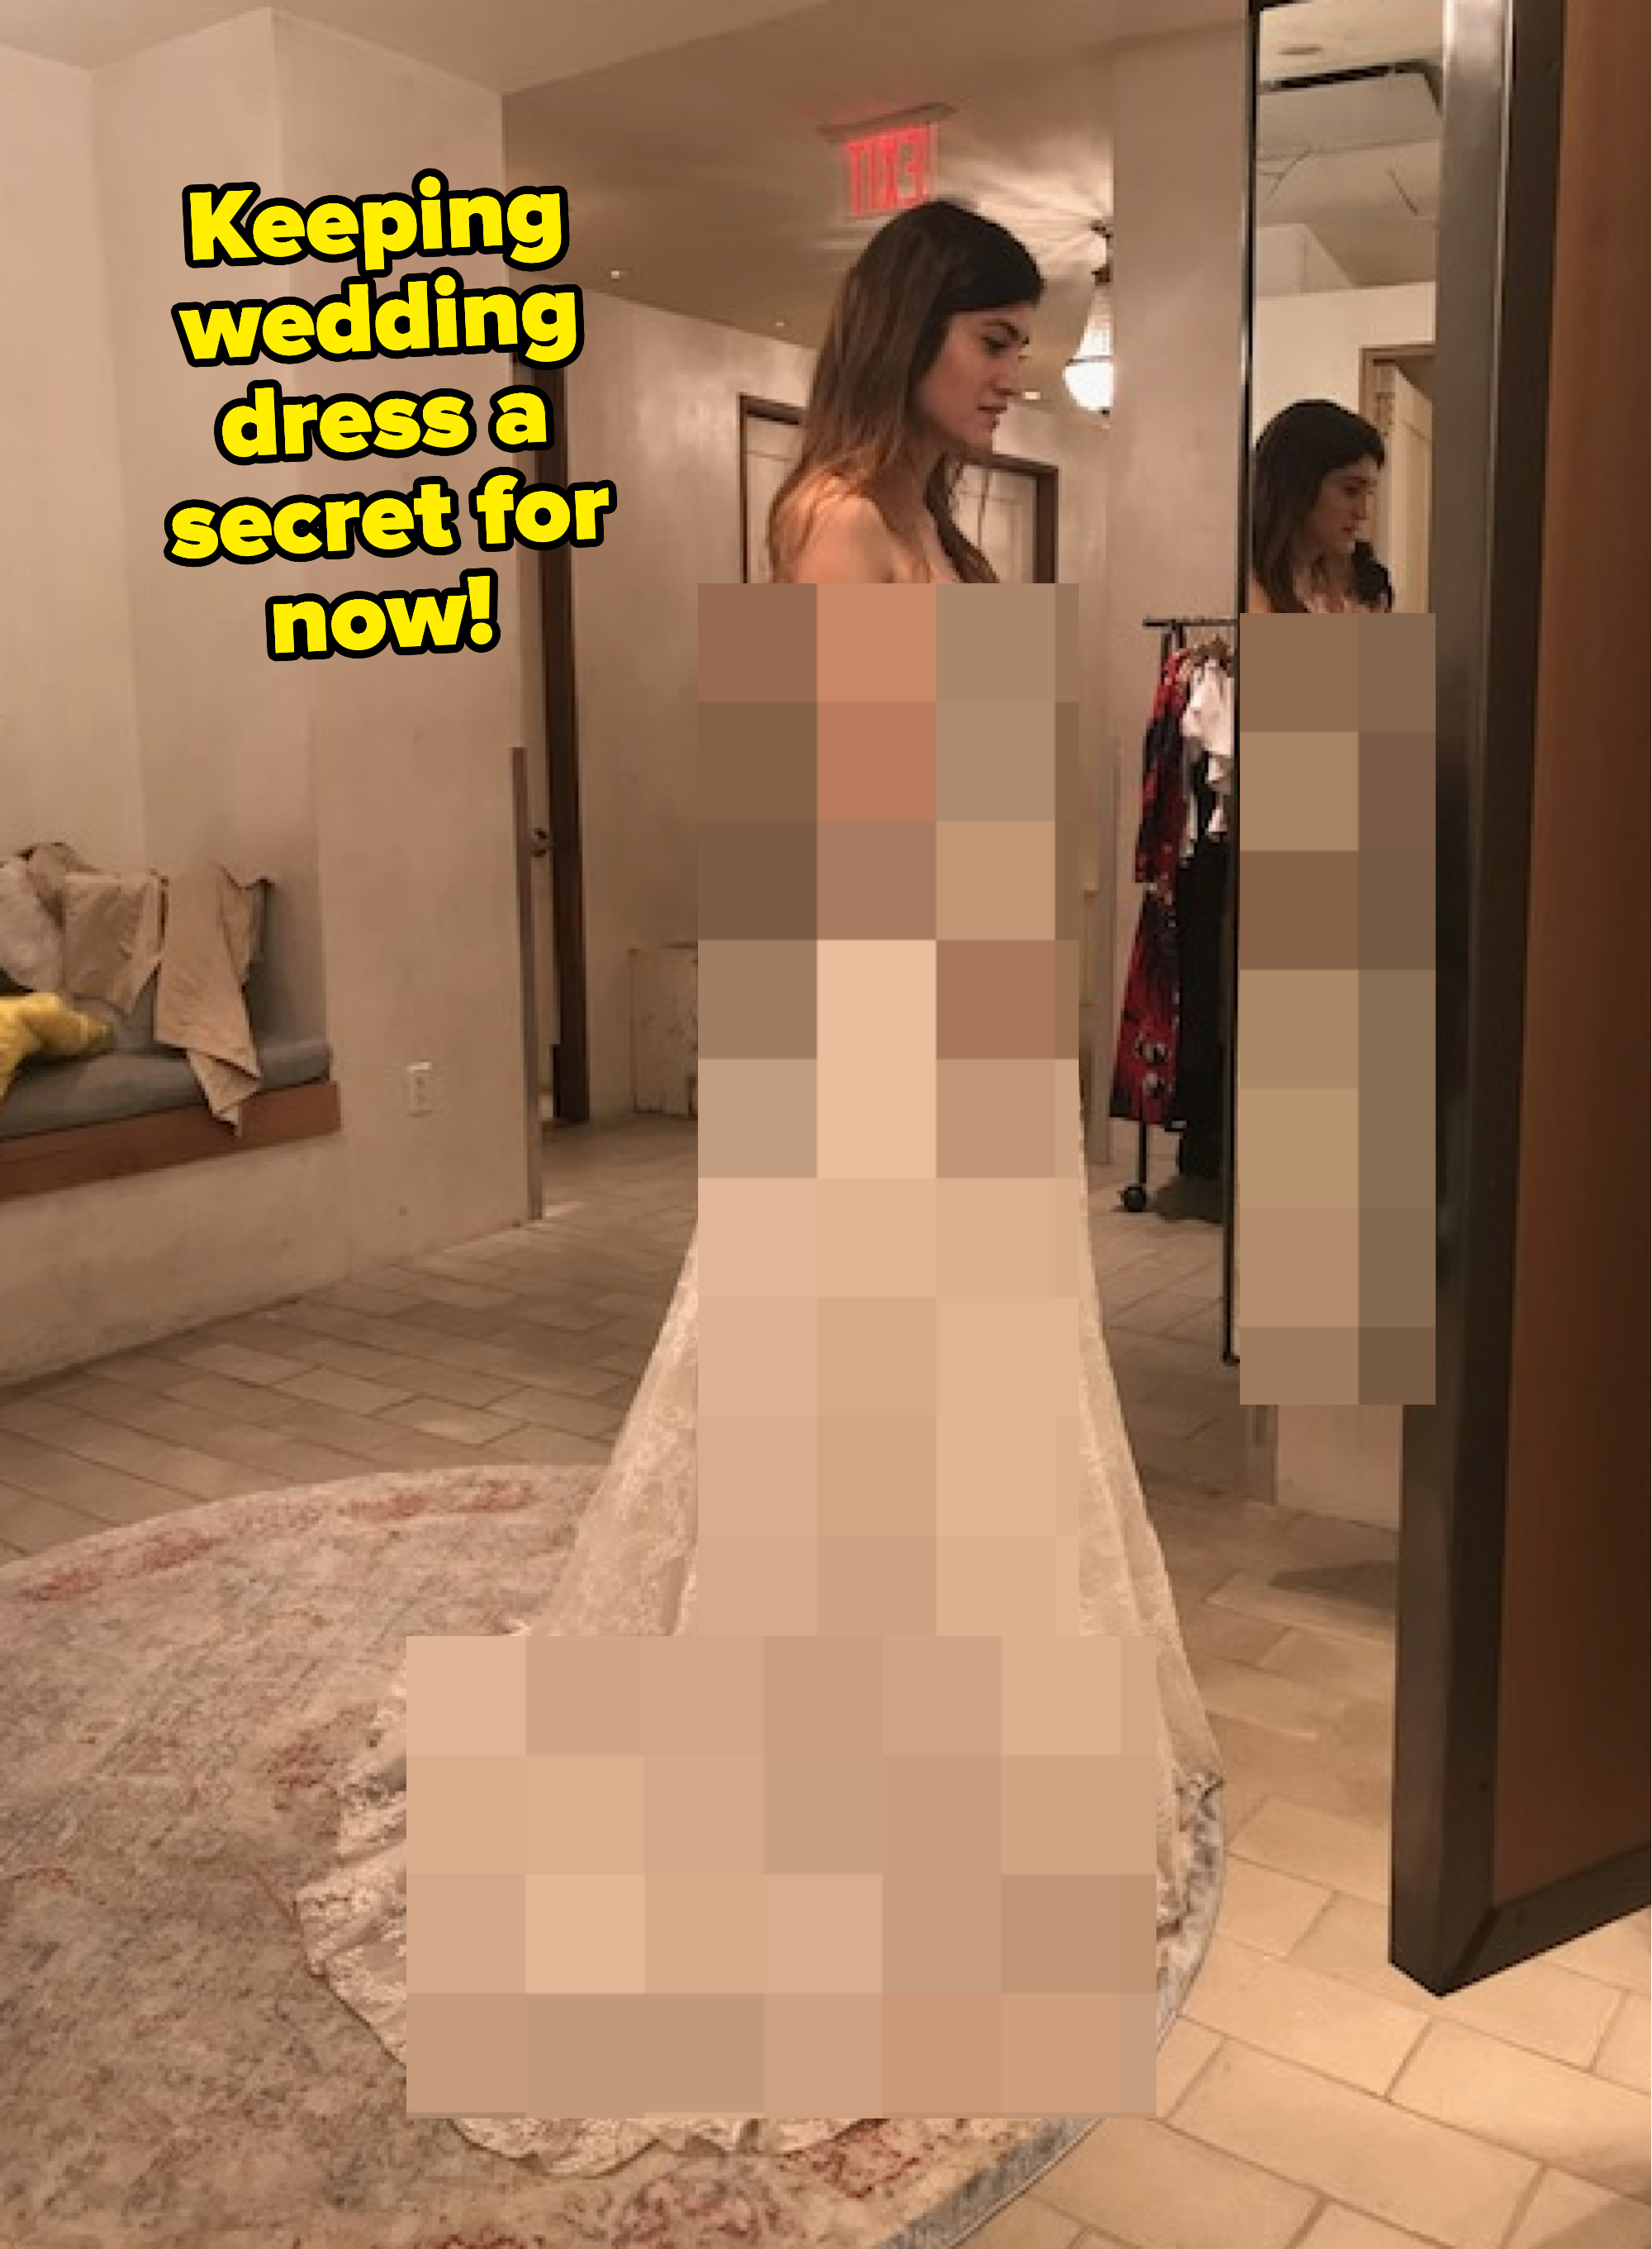 Raven Ishak in the wedding dress, which is pixelated